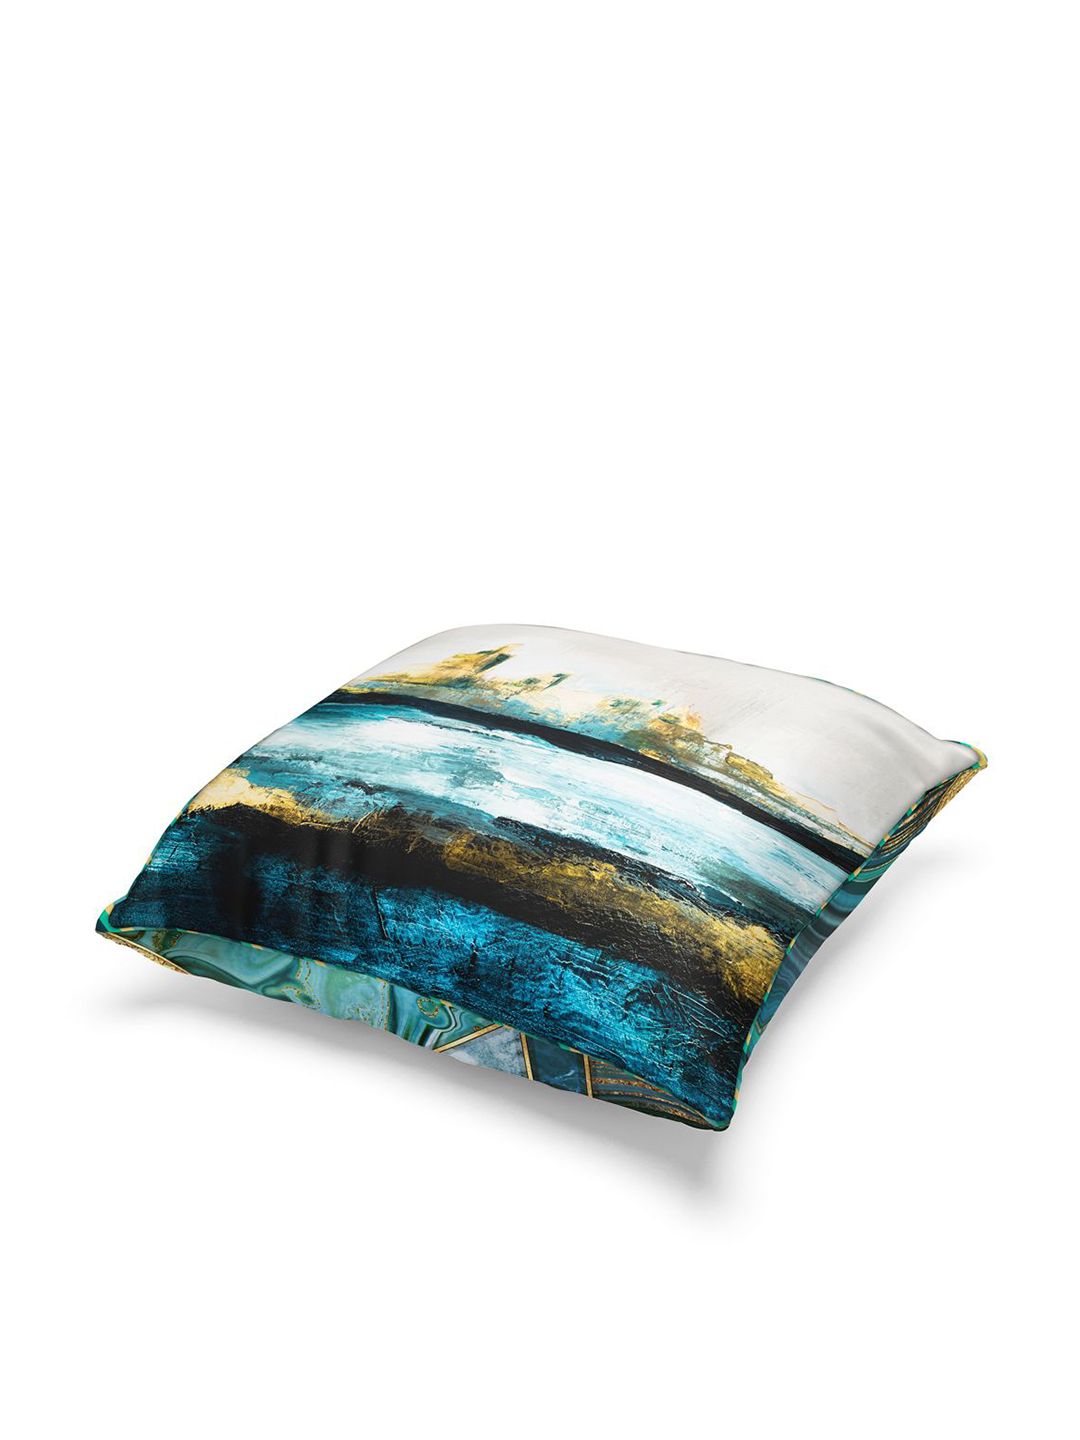 BIANCA Teal & Gold-Toned 16" x 16" Set of 2 Abstract Square Cushion Covers Price in India